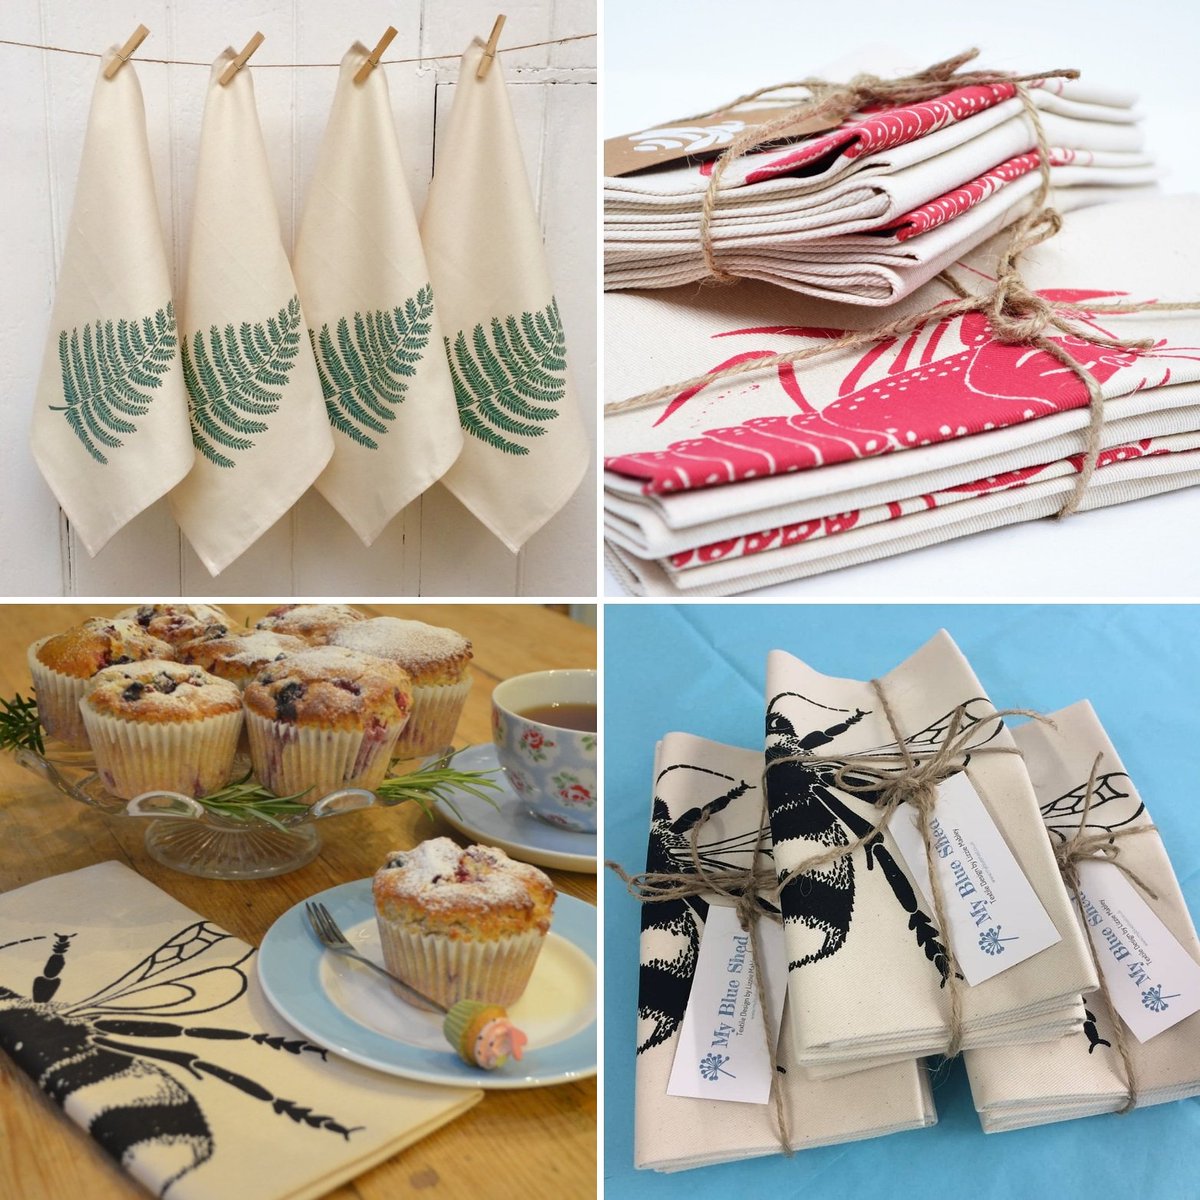 My Fern, Lobster and Bee napkins will soon be discontinued while I have a re-think. I still have stock so hurry over to myblueshed.folksy.com and grab some while you can! Lovely gifts for foodie friends and gardeners. 
@folksy #giftsforfoodies #giftsforgardeners